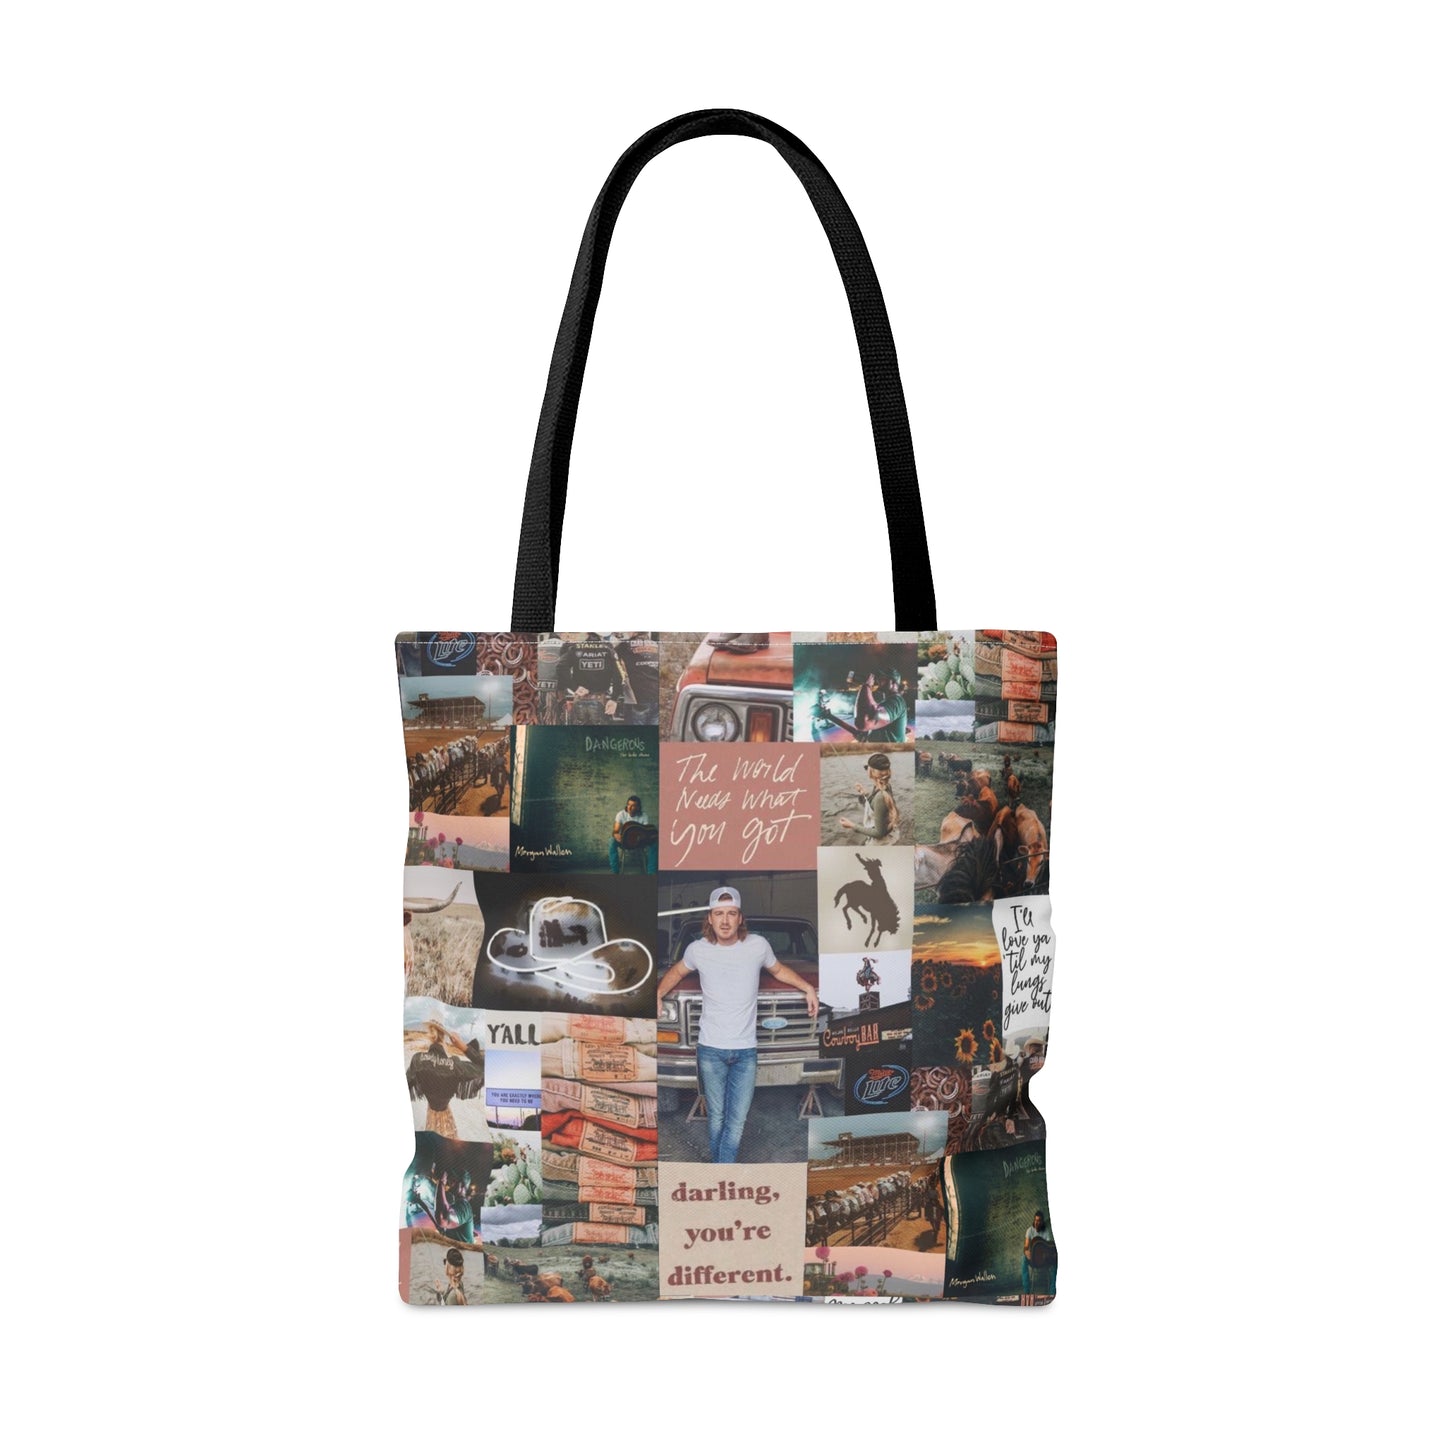 Morgan Wallen Darling You're Different Collage Tote Bag